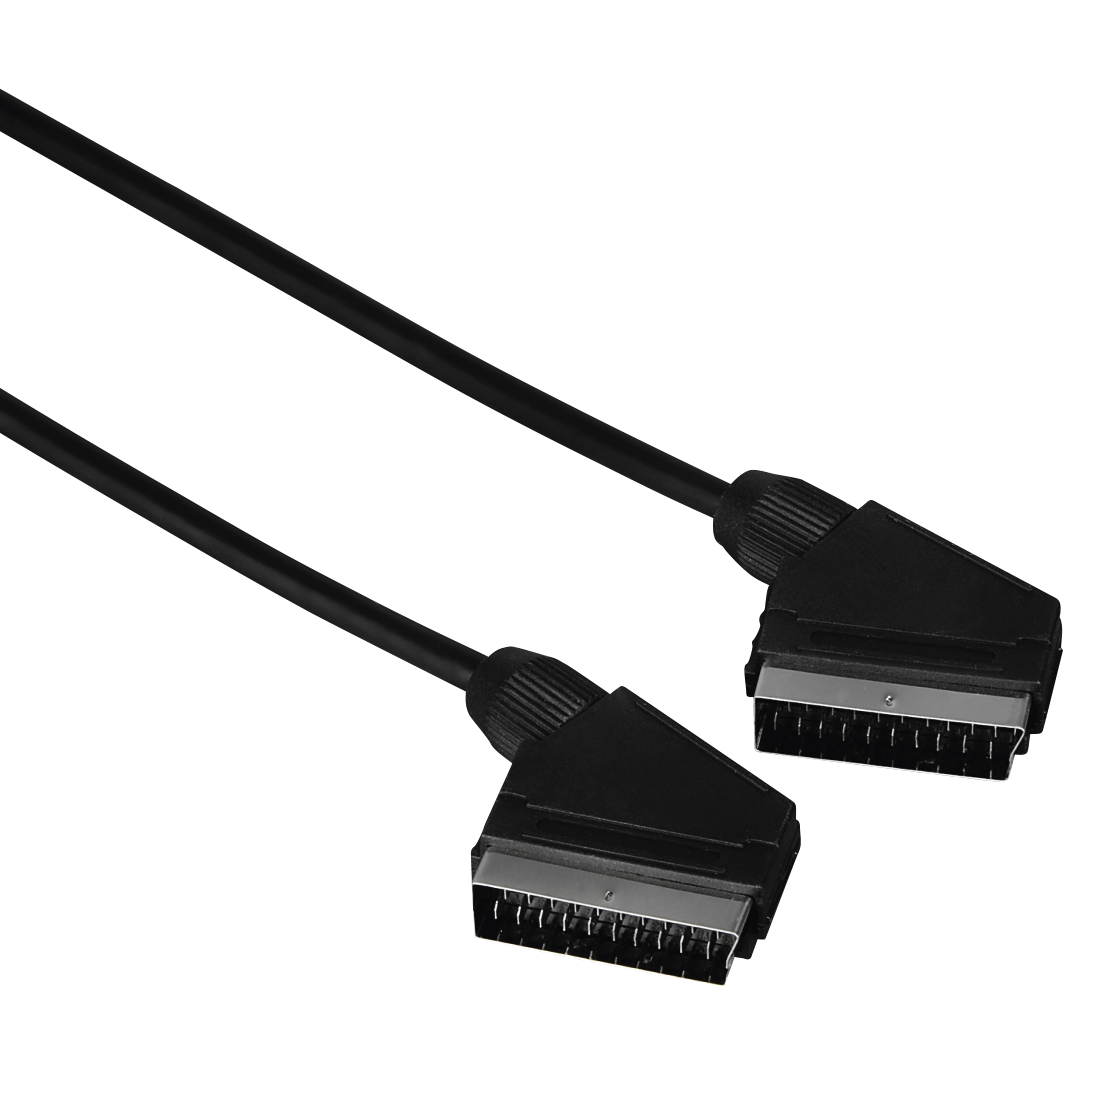 Hama Scart Cable, 1.5 m